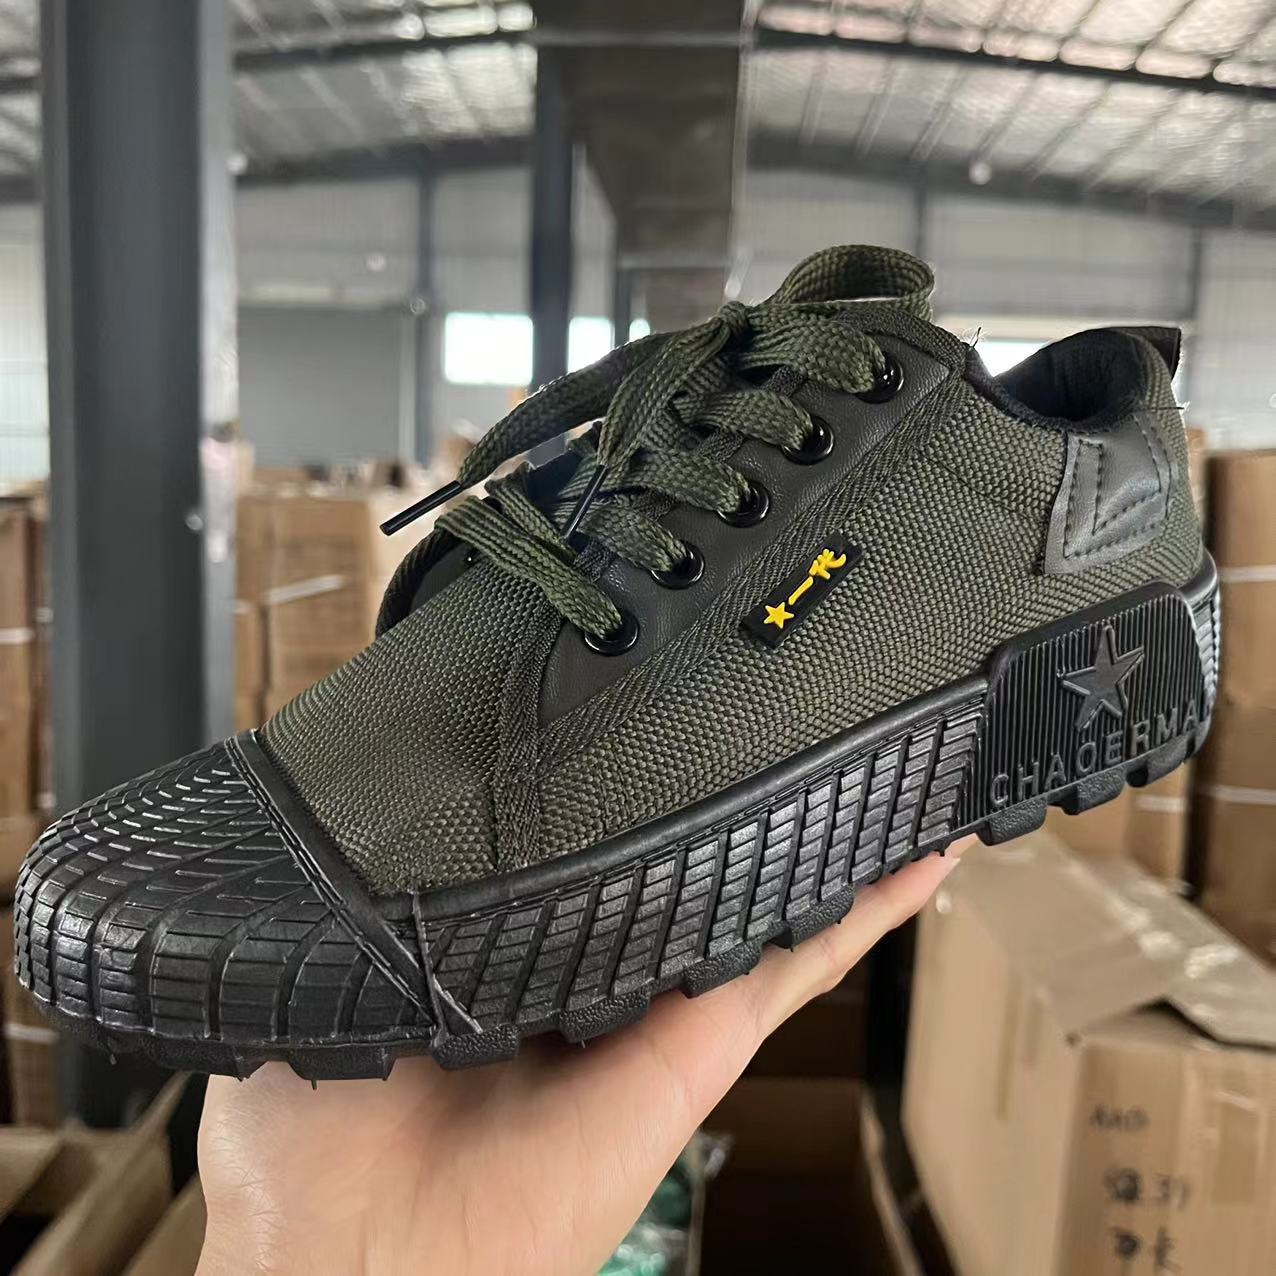 One Piece Dropshipping Low-Top Cloth Shoes Liberation Shoes High-Top Canvas Worker Training Shoes Shoes Outdoor Training High-Low Top Construction Site Shoes